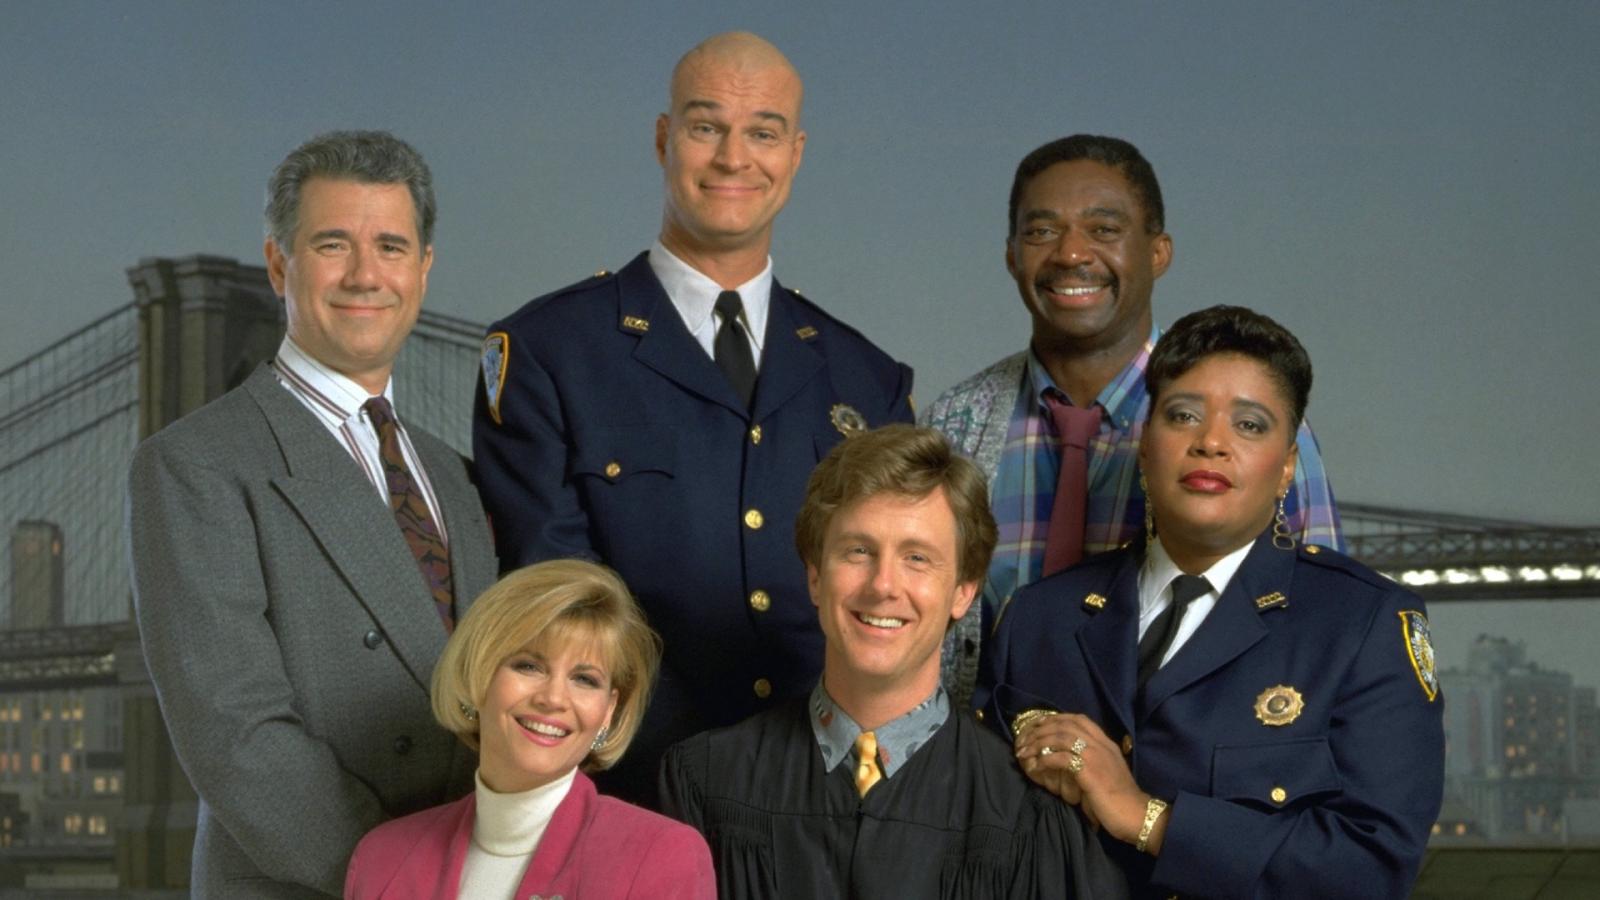 15 Lesser-Known '80s Shows That Still Hold Up in 2023 - image 7